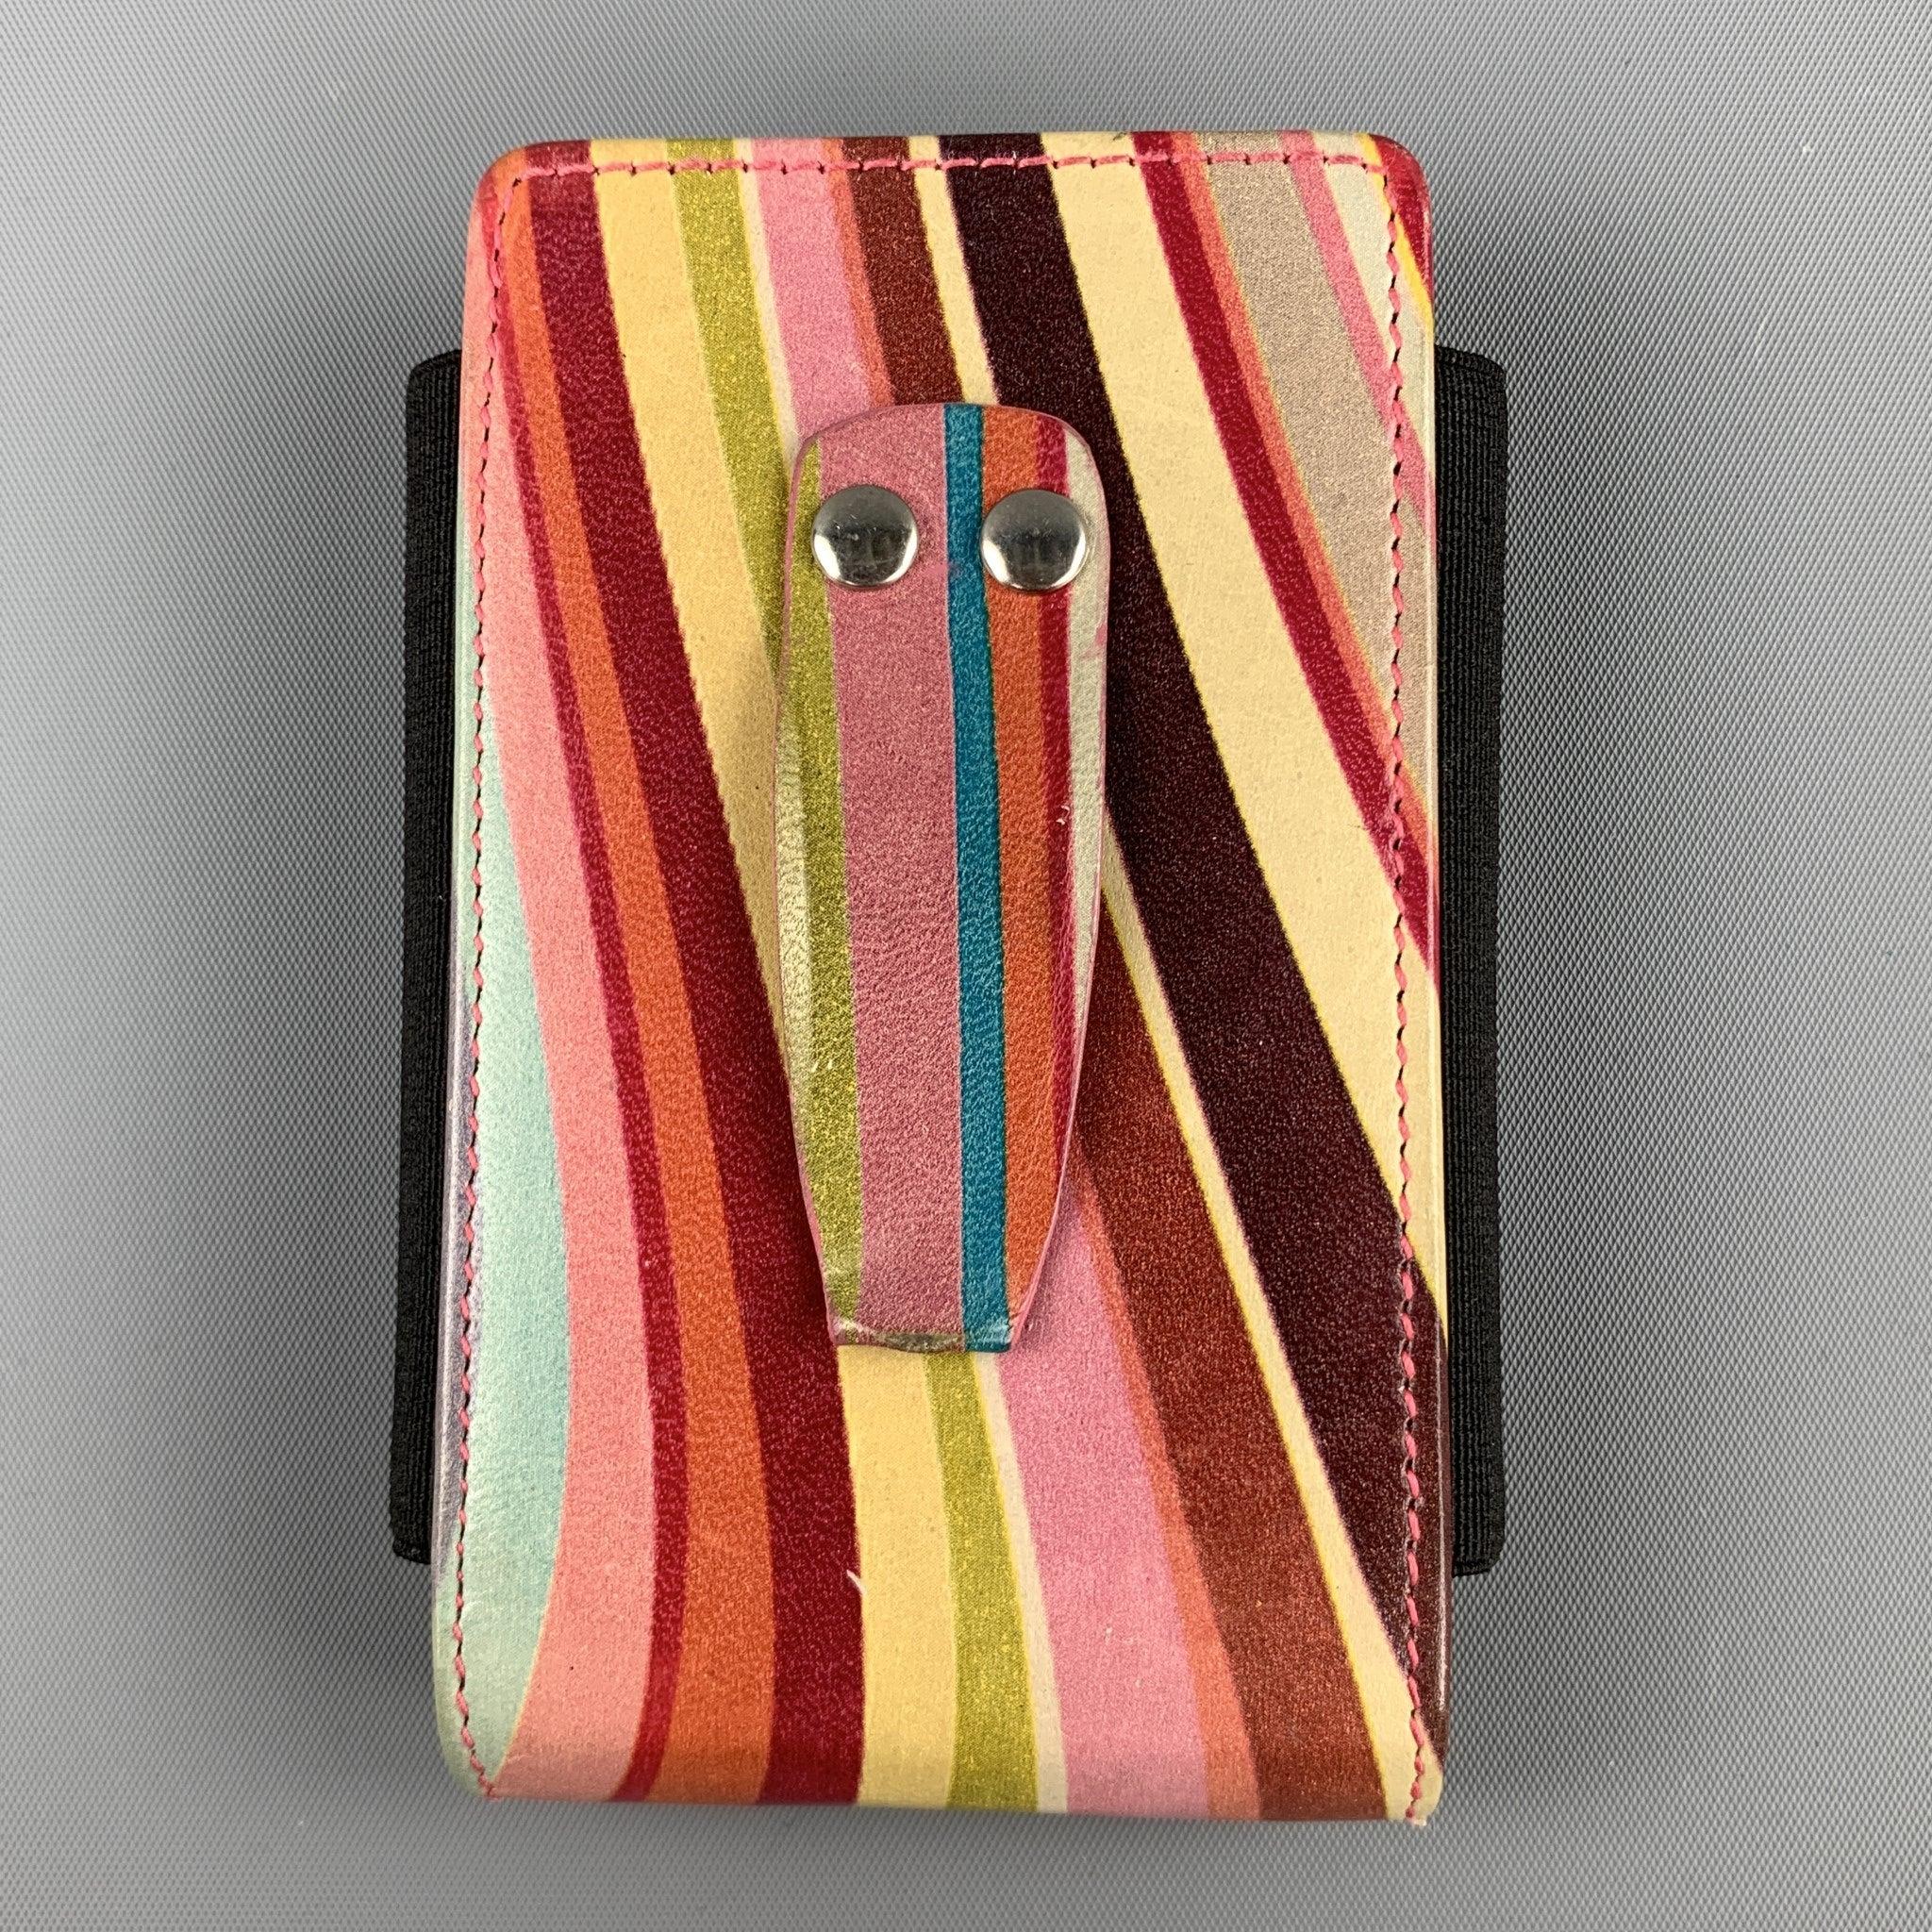 PAUL SMITH phone case comes in a multi-color leather featuring a back clip. Made in Italy.Good Pre-Owned Condition. 

Measurements: 
  2.25 inches  x 4 inches 
  
  
 
Reference: 57669
Category: Bags & Leather Goods
More Details
    
Brand:  PAUL